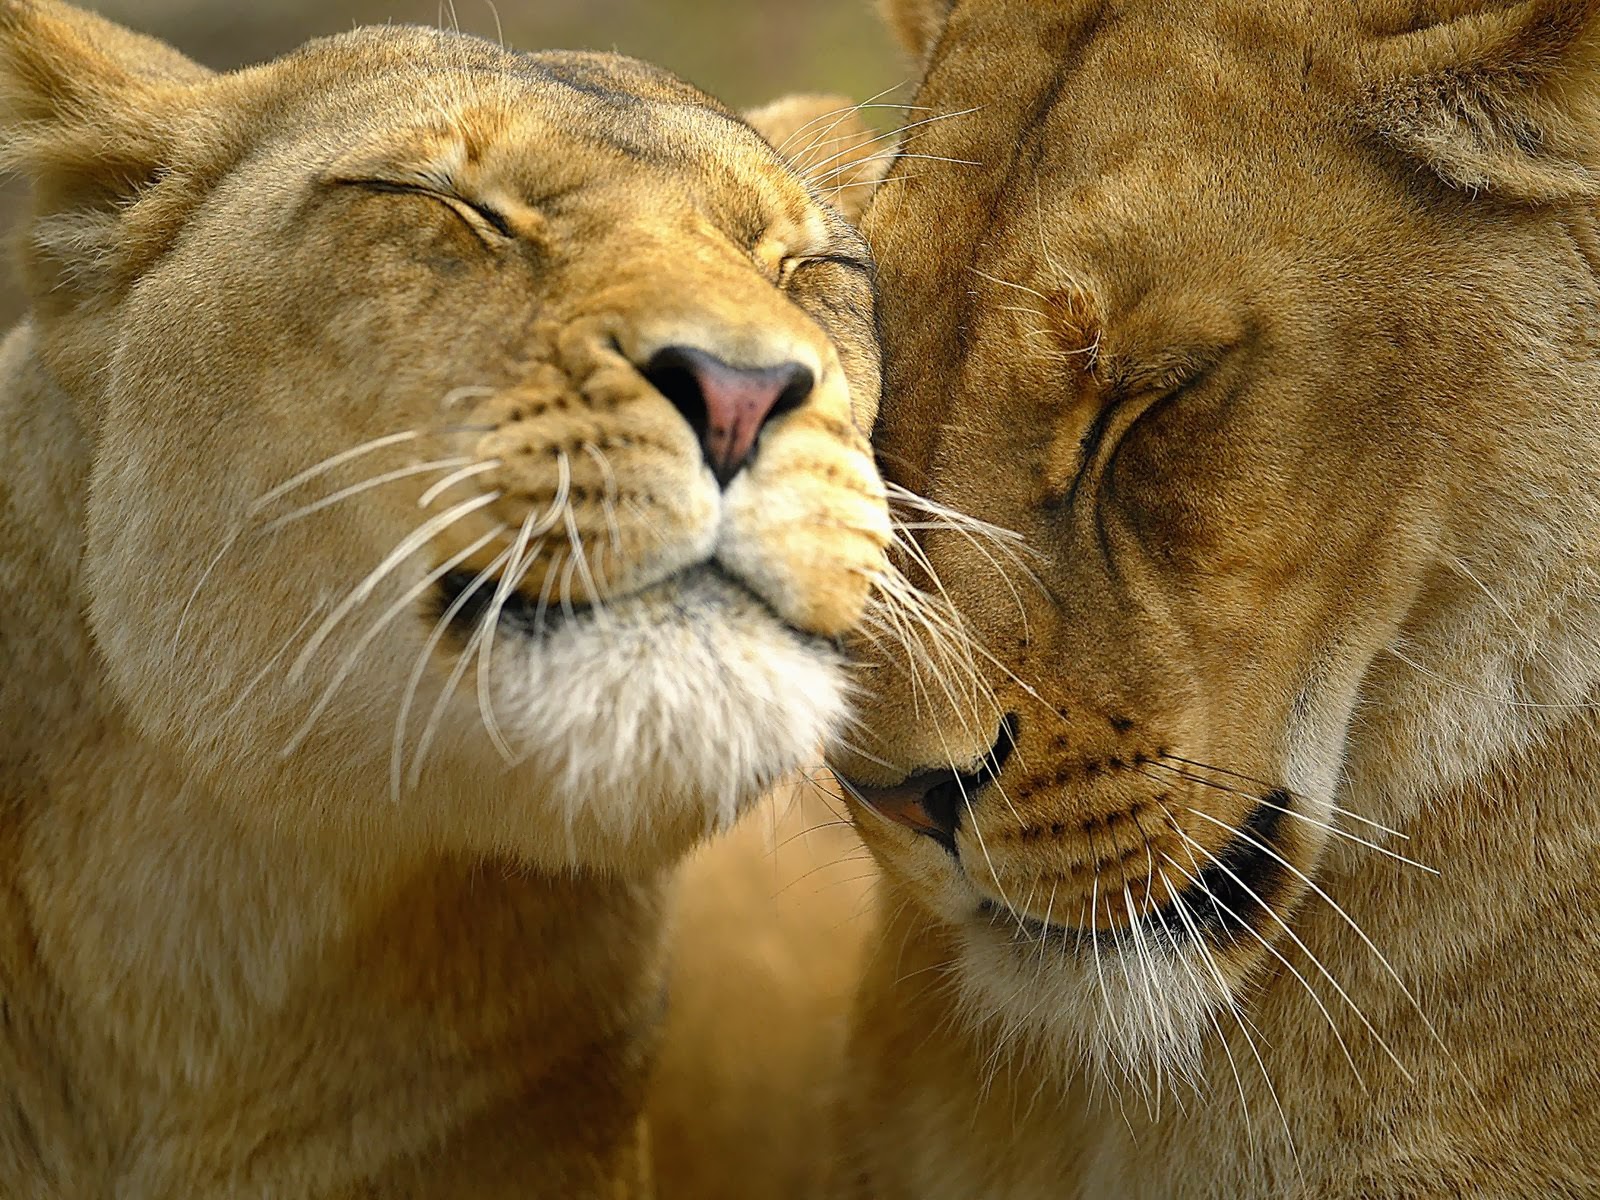 What animals do lions have a symbiotic relationship with?